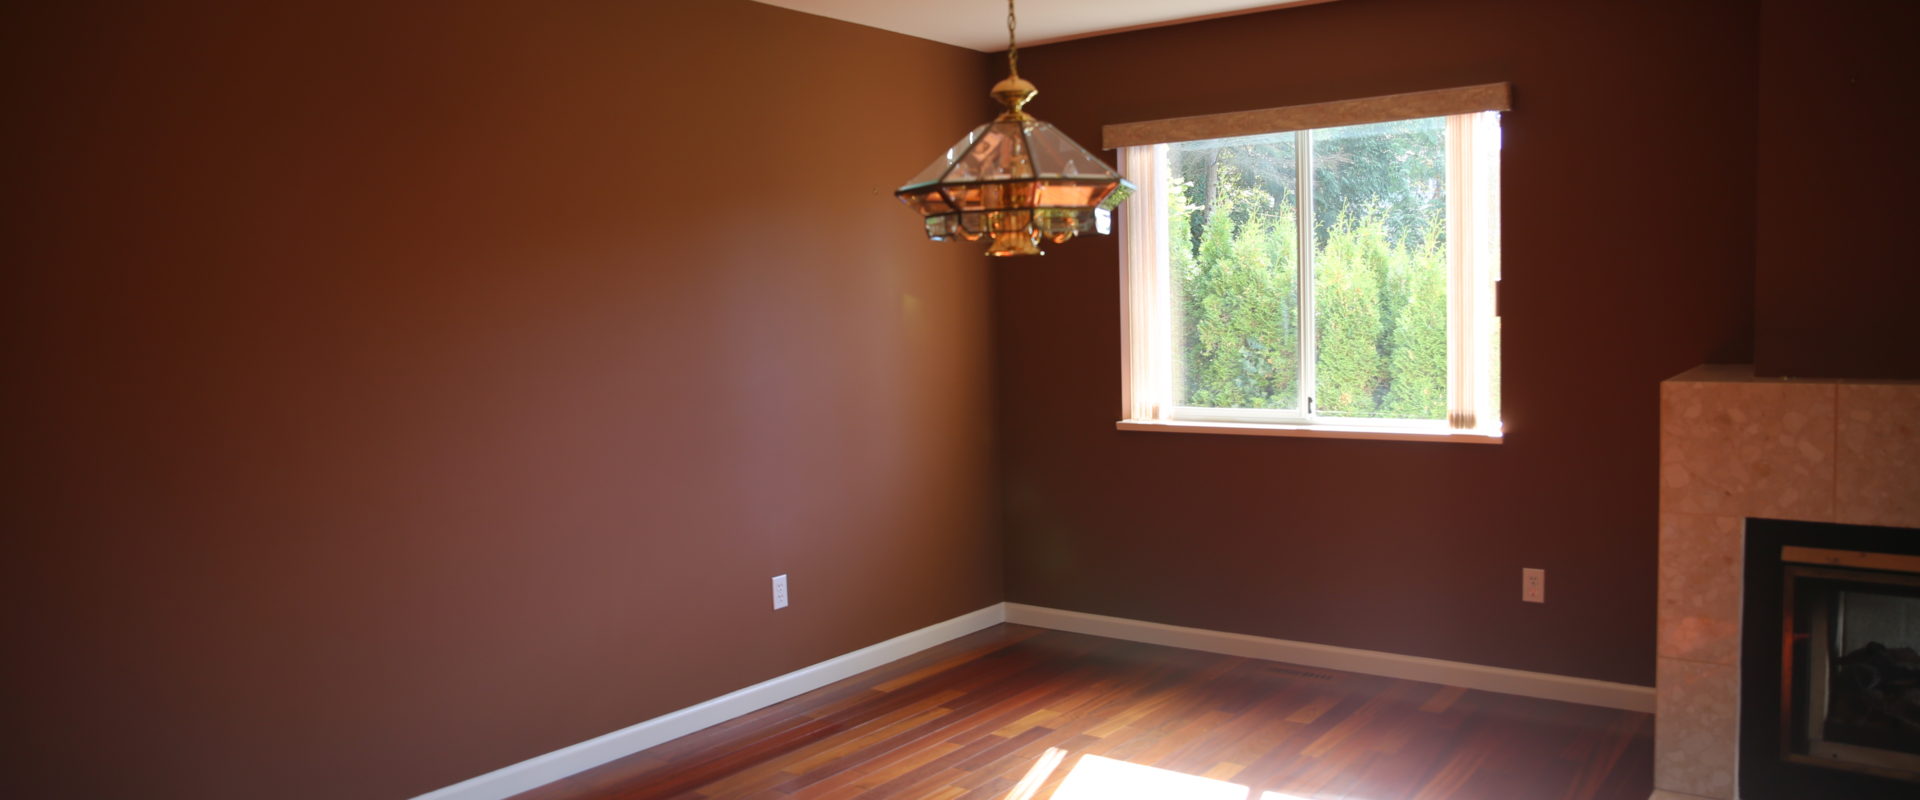 West Vancouver Caulfeild outstanding 3br 3ba House for rent!